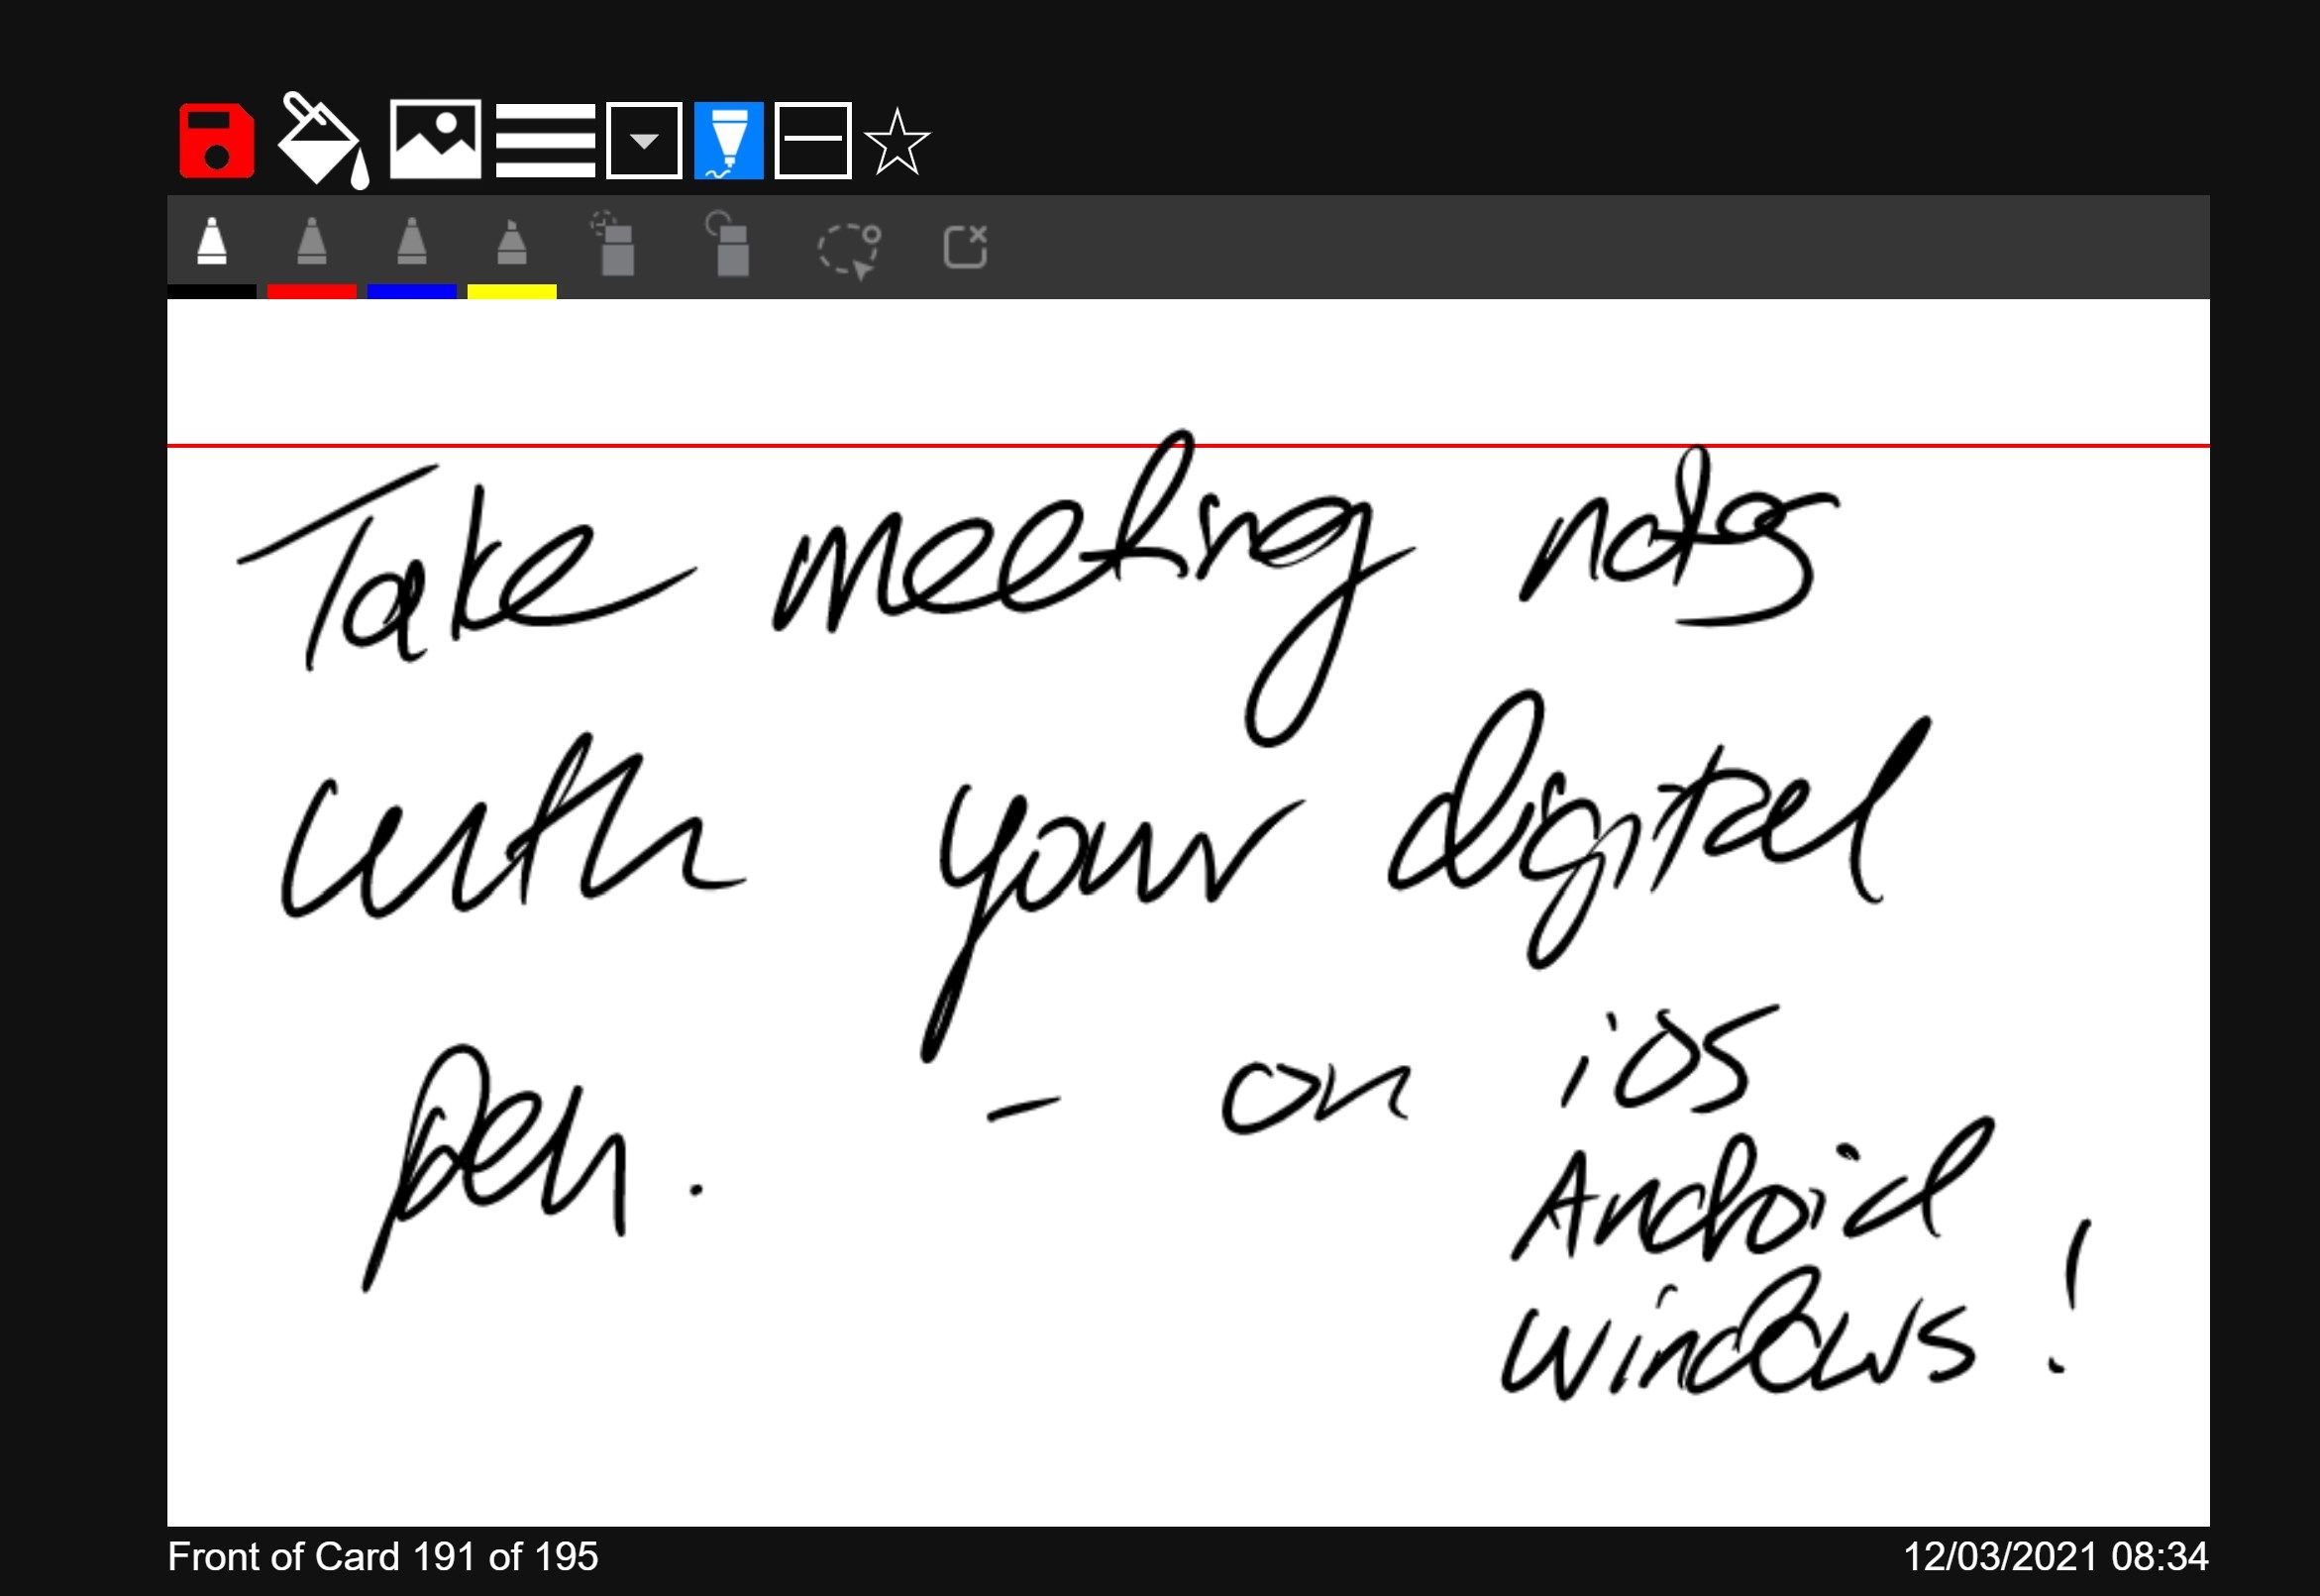 The only index card app that supports digital ink across ALL platforms - Windows, Mac, iOS, Android and even Web!